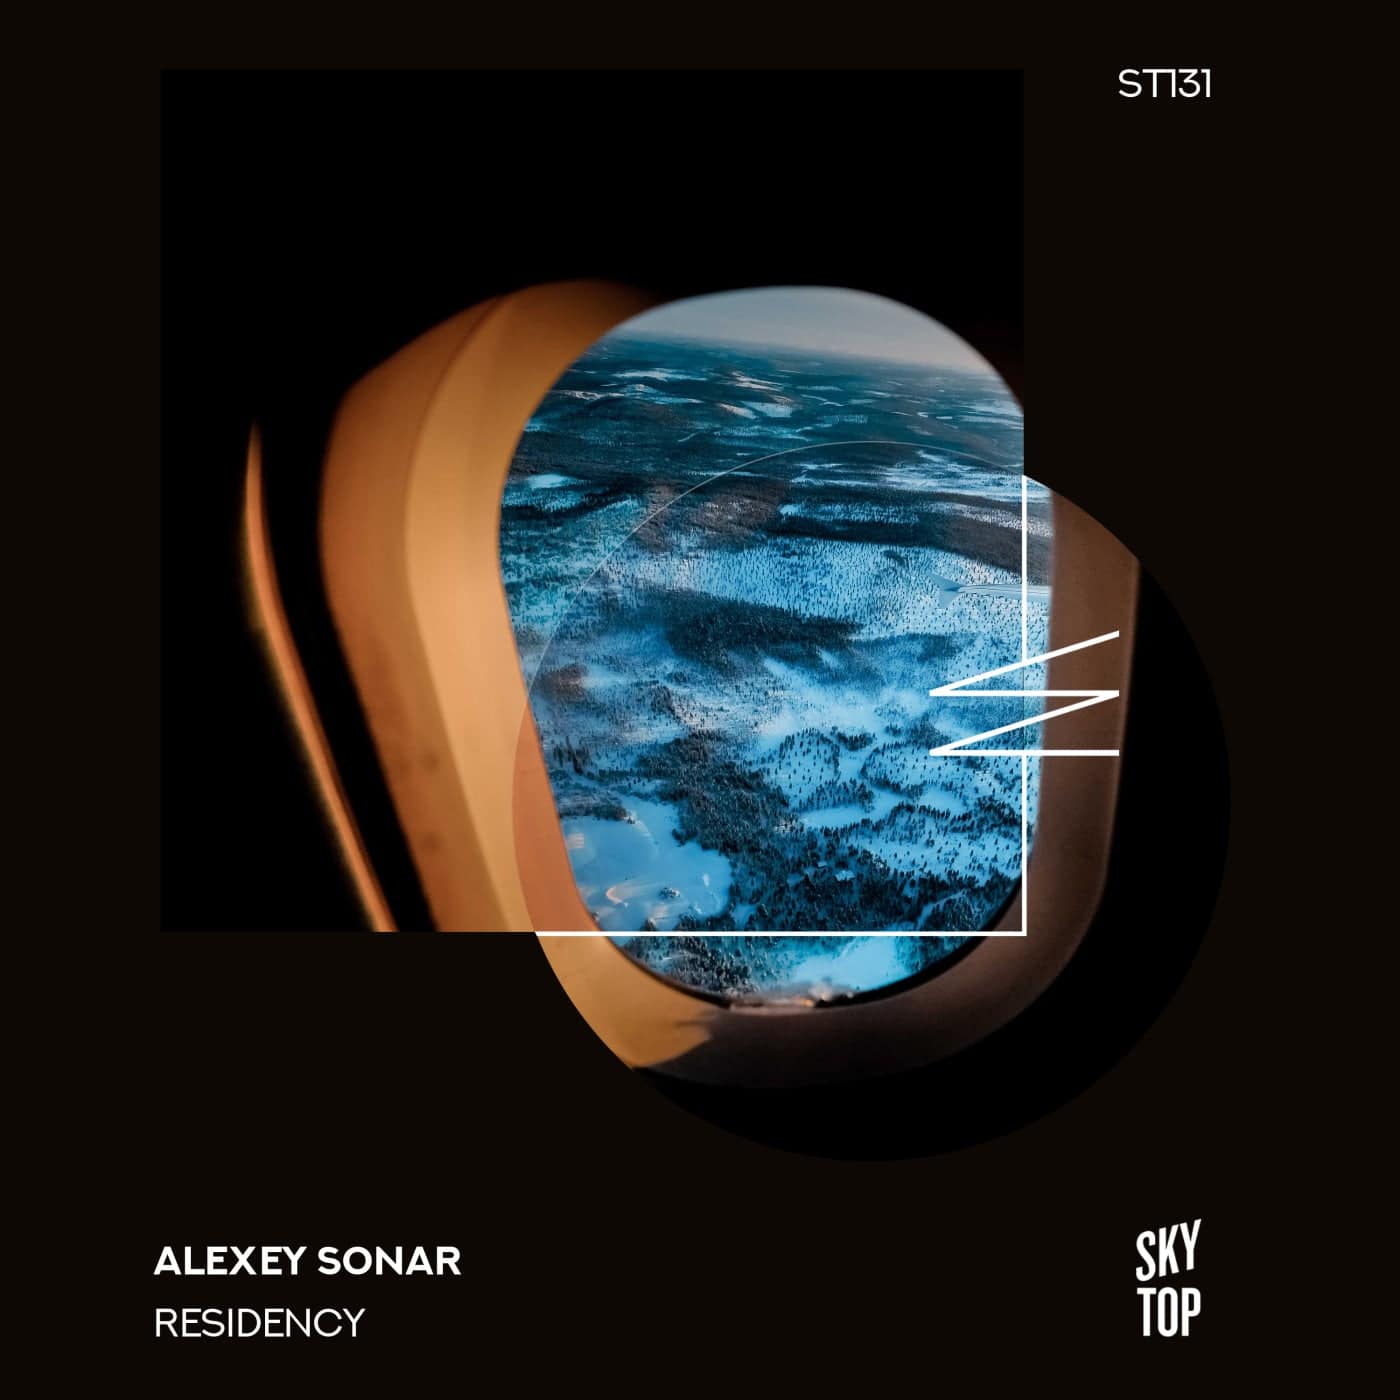 image cover: Alexey Sonar - Residency / ST131